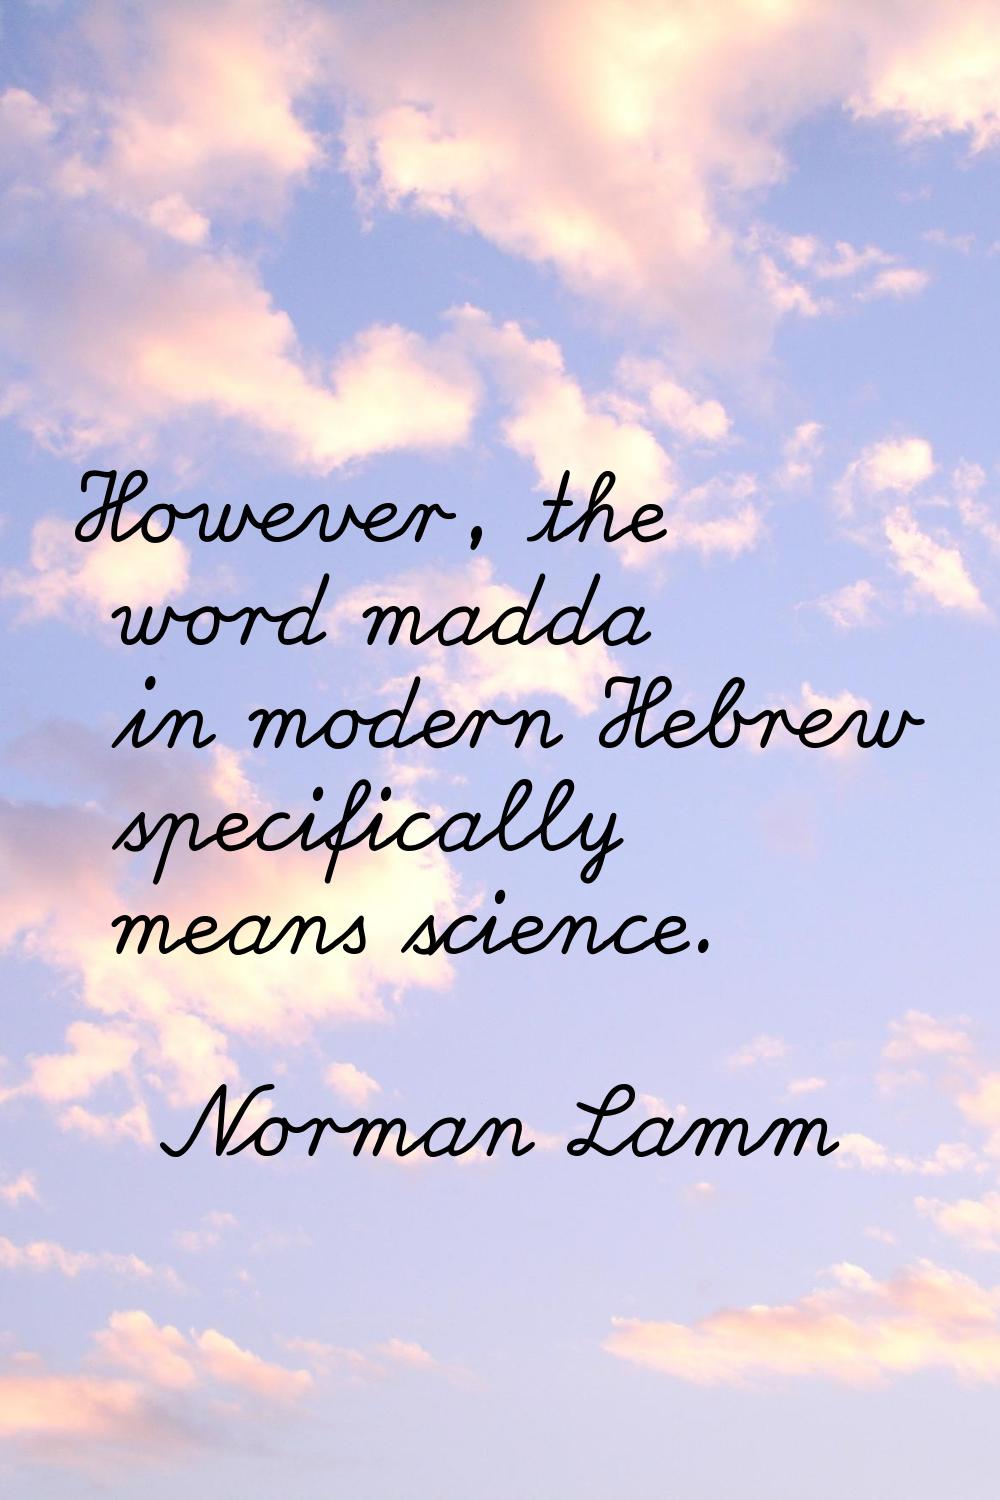 However, the word madda in modern Hebrew specifically means science.